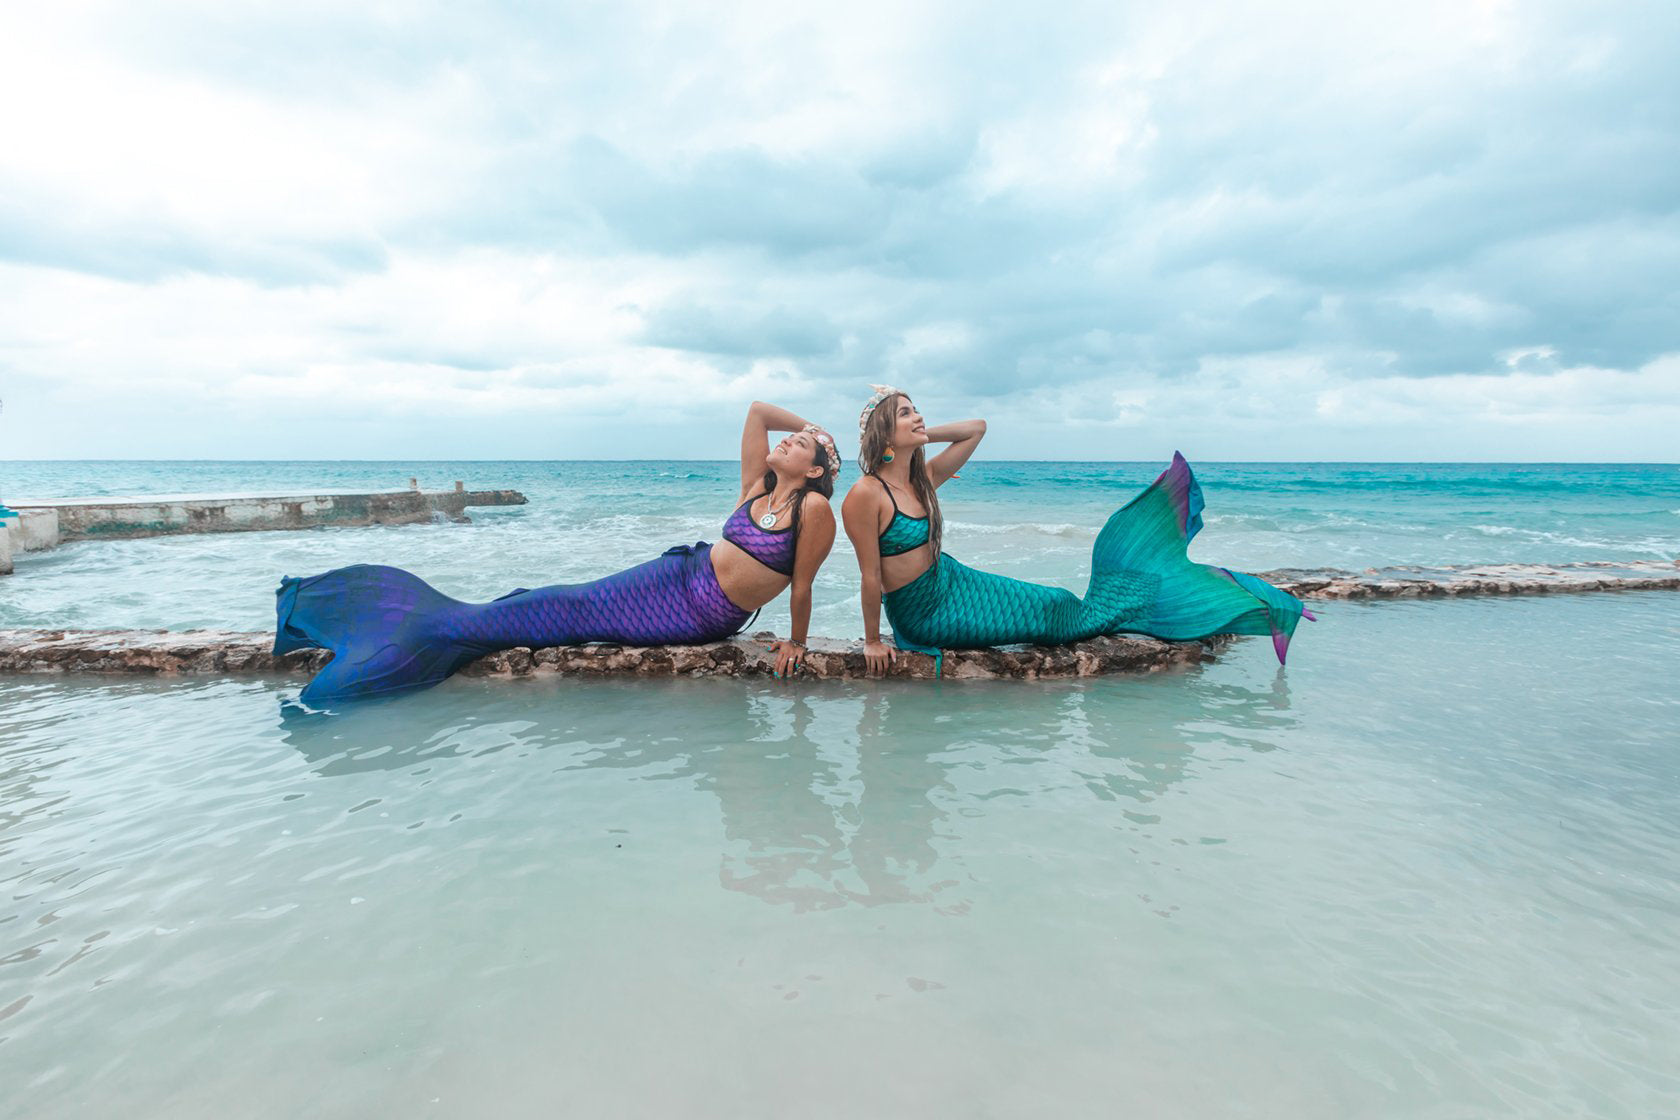 Passion Mermaid Tail - DiveTail by Cape Cali